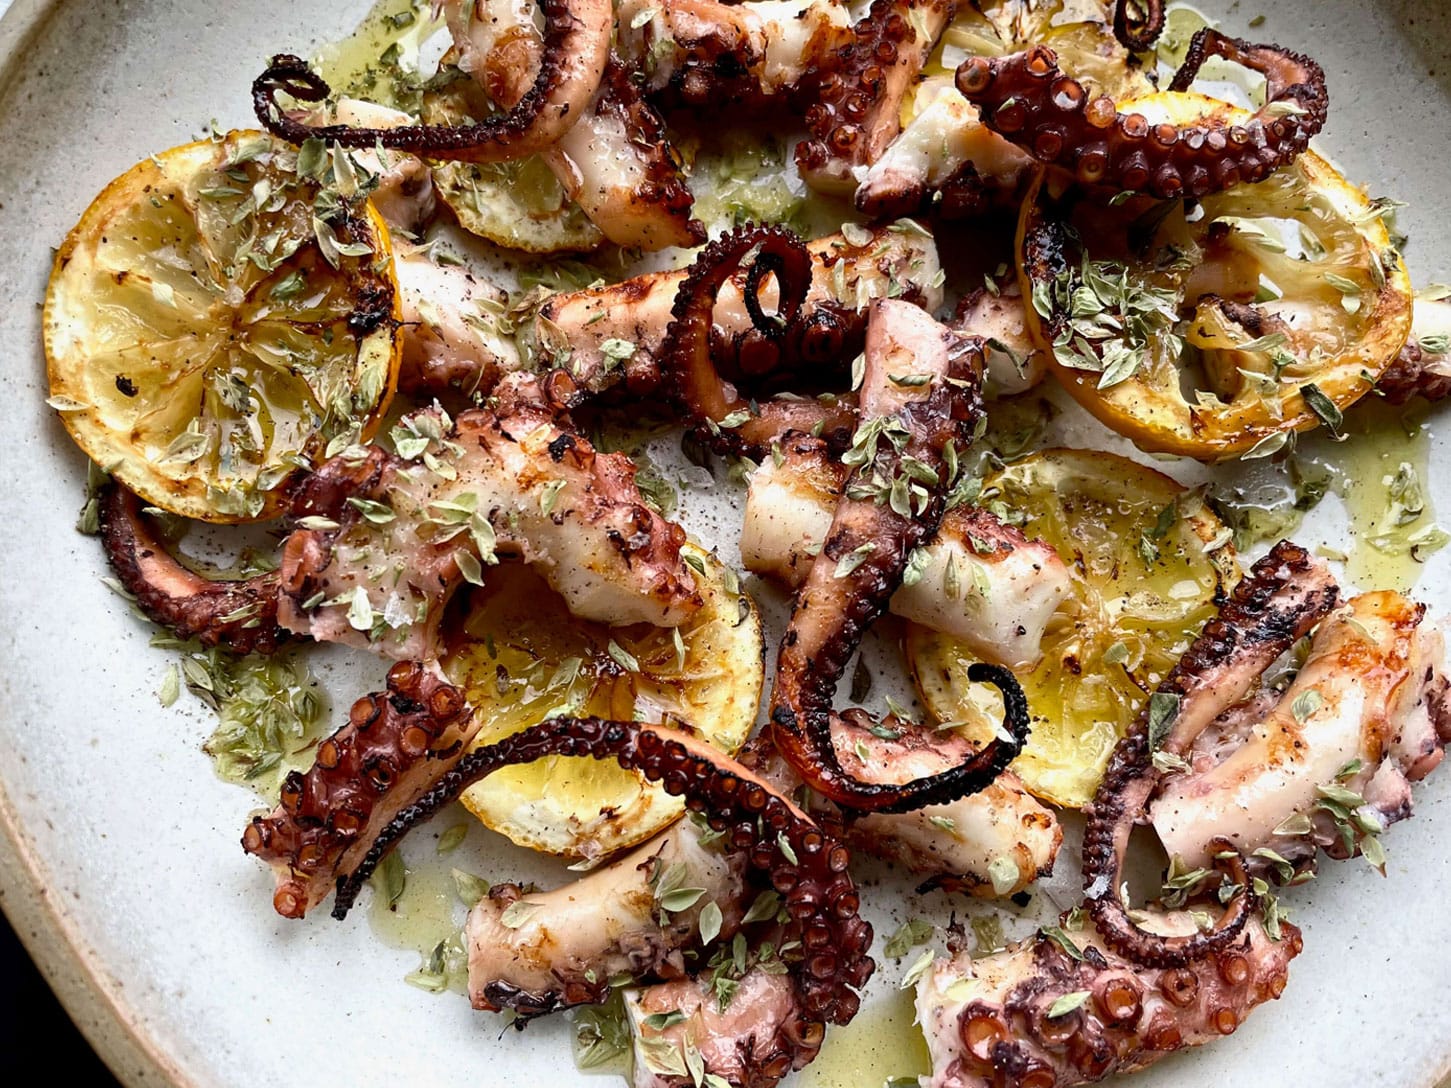 Grilled Octopus with Lemon, Oregano and Bay